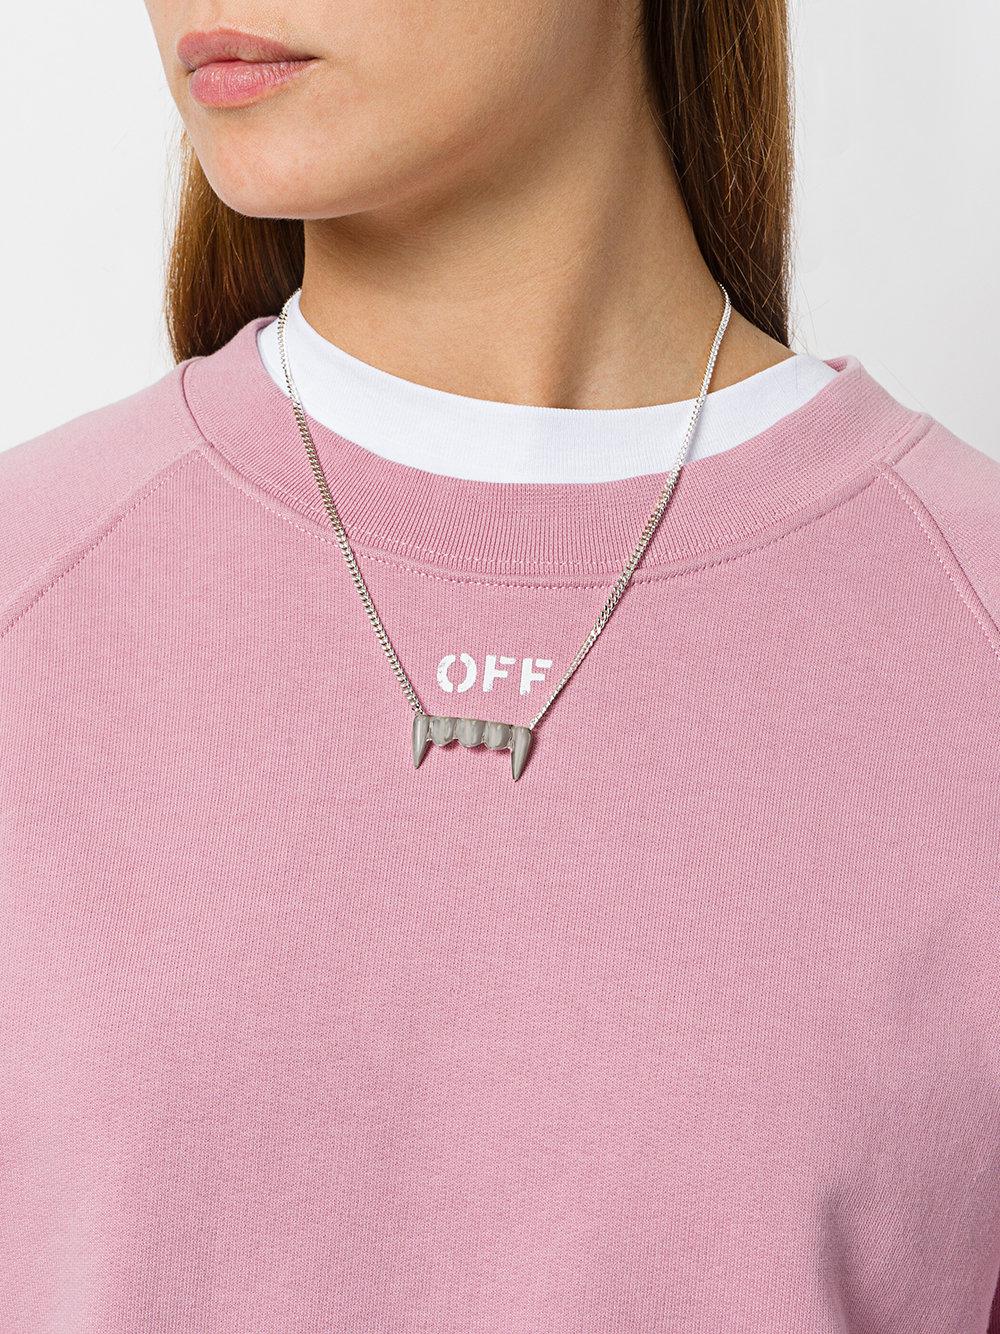 P.a.m. Perks And Mini Original Fang Necklace in Metallic | Lyst 